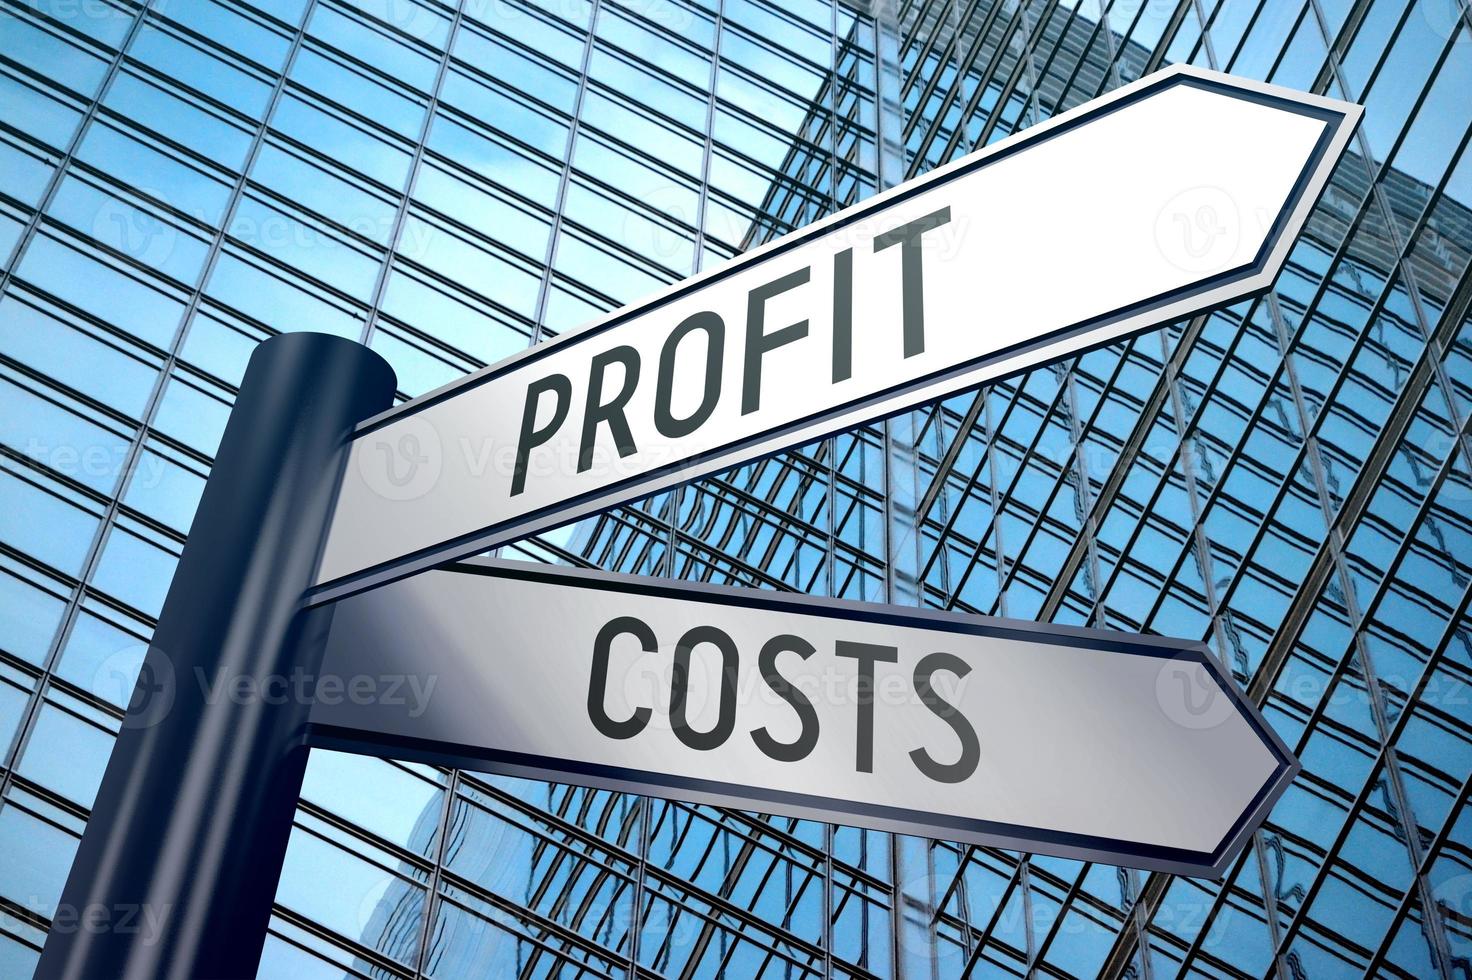 Profit and Costs - Signpost With Two Arrows, Office Building in Background photo